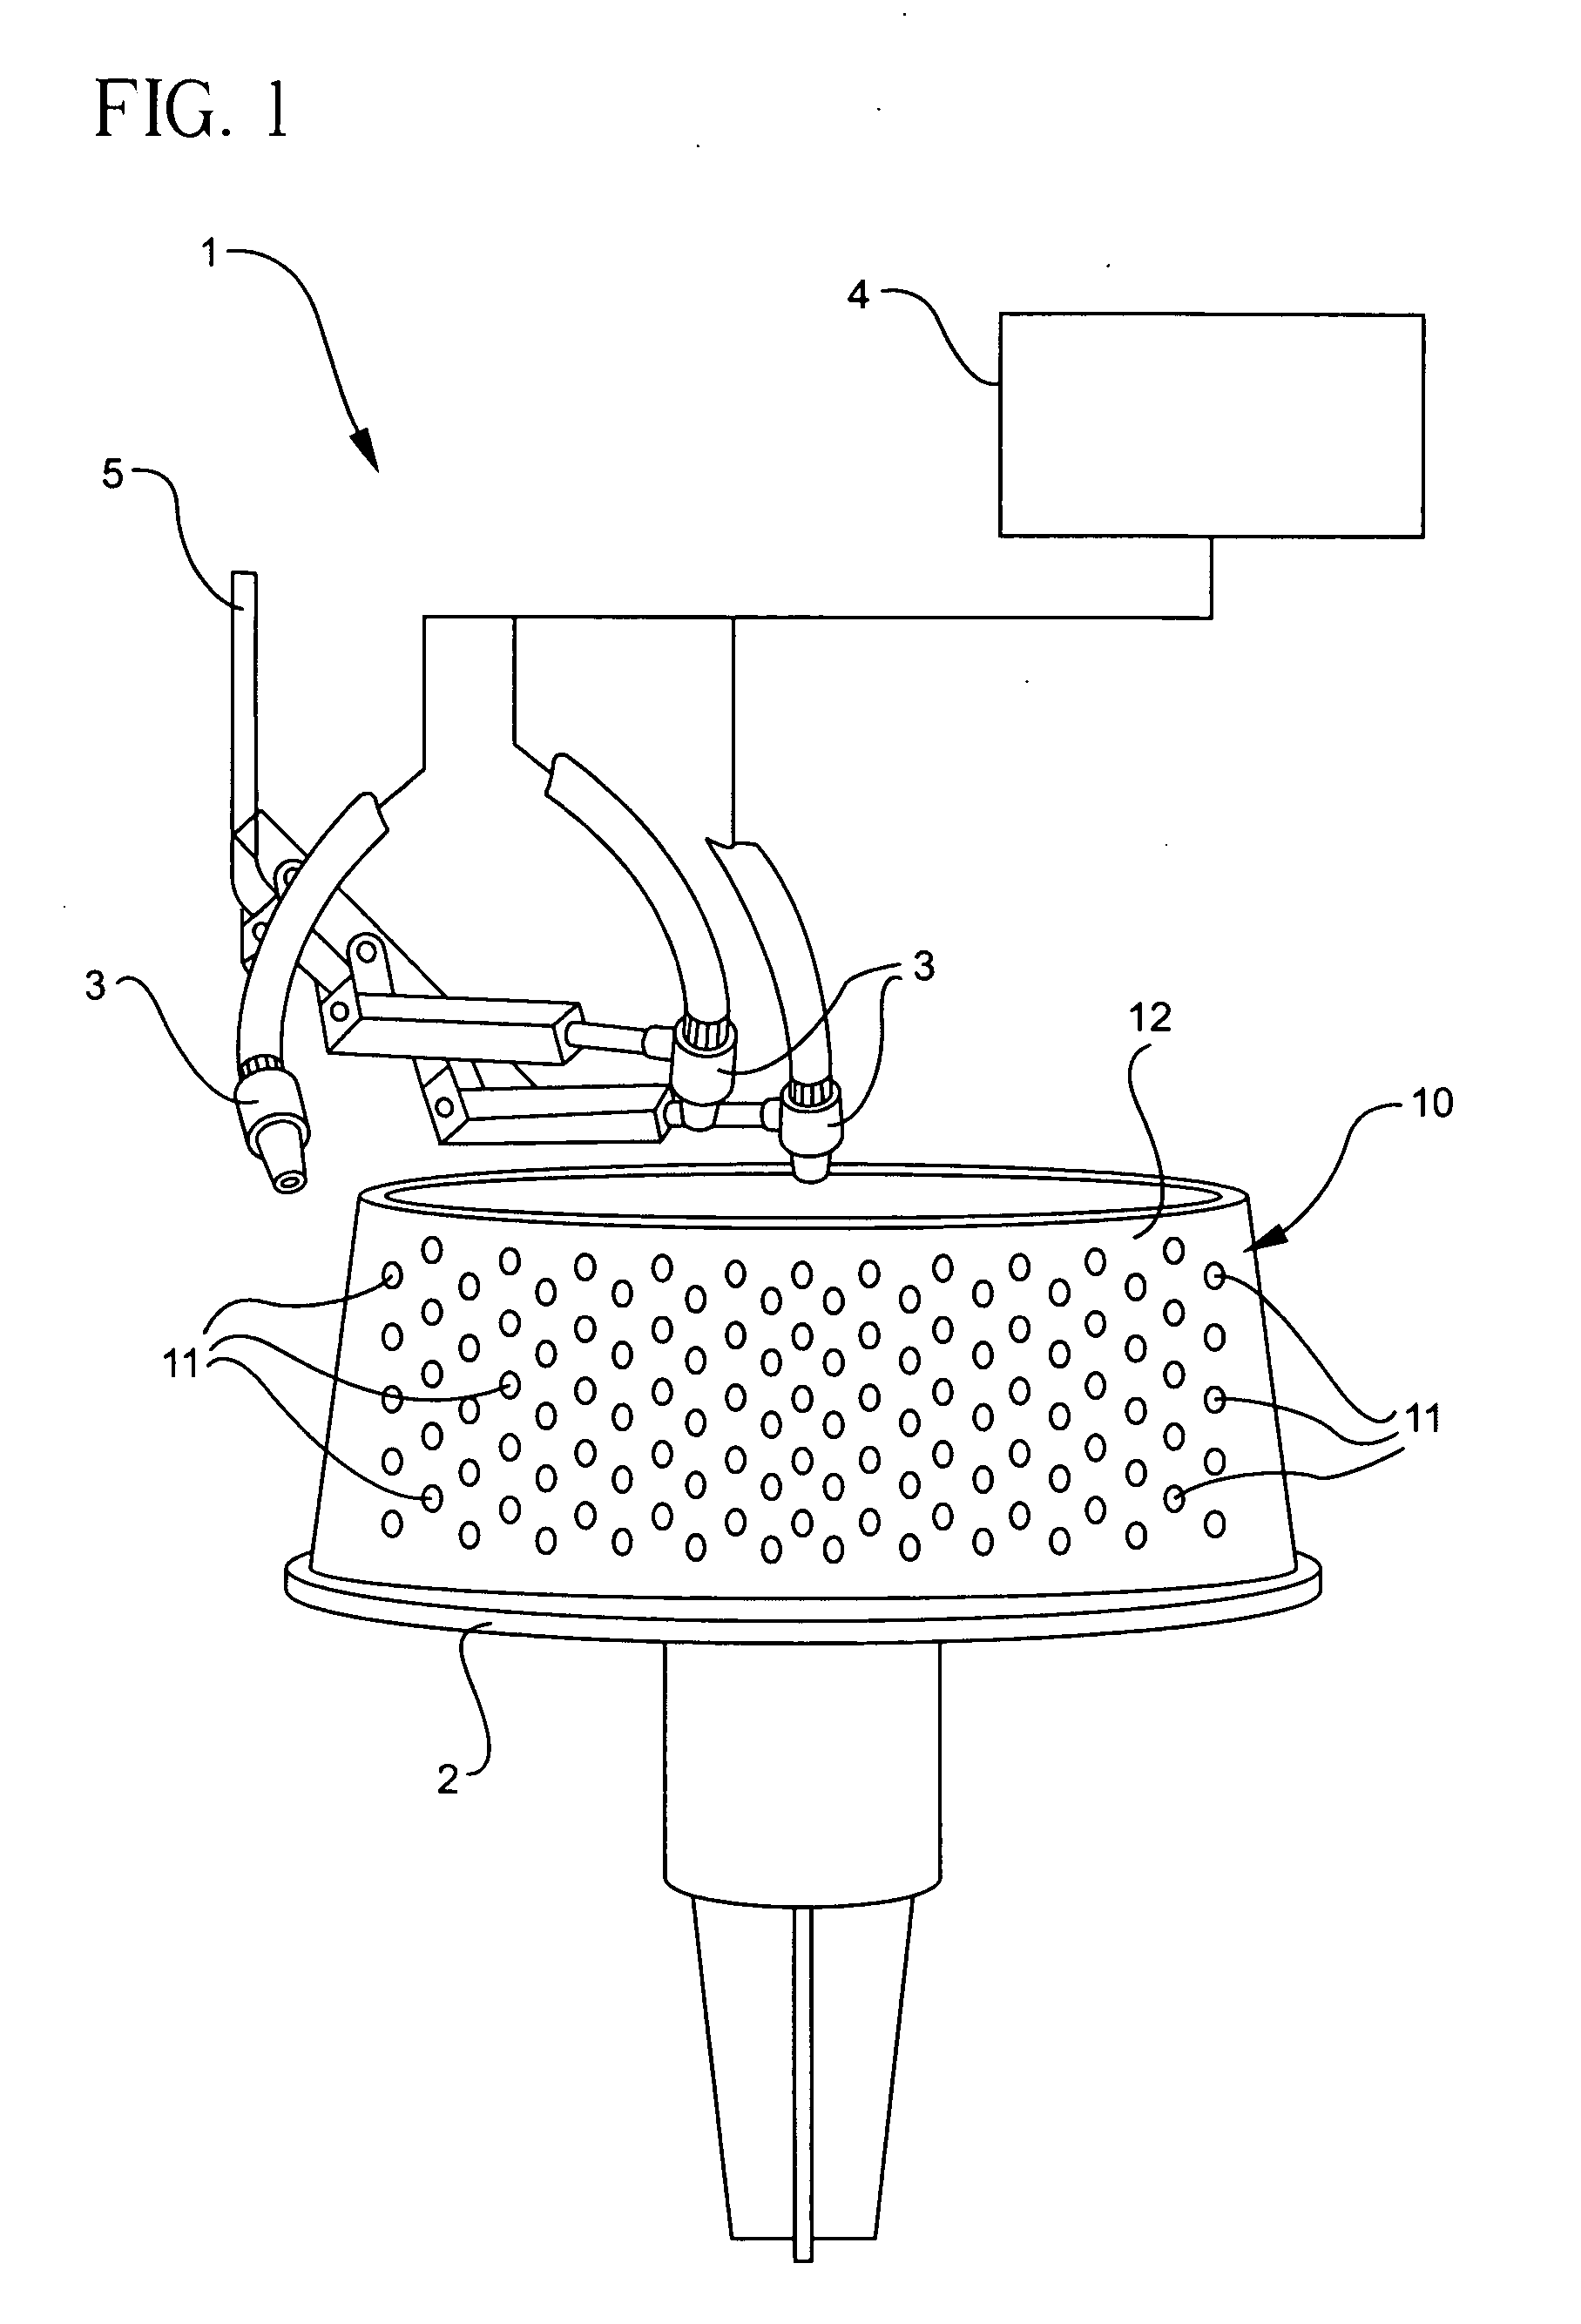 Process for removing thermal barrier coatings